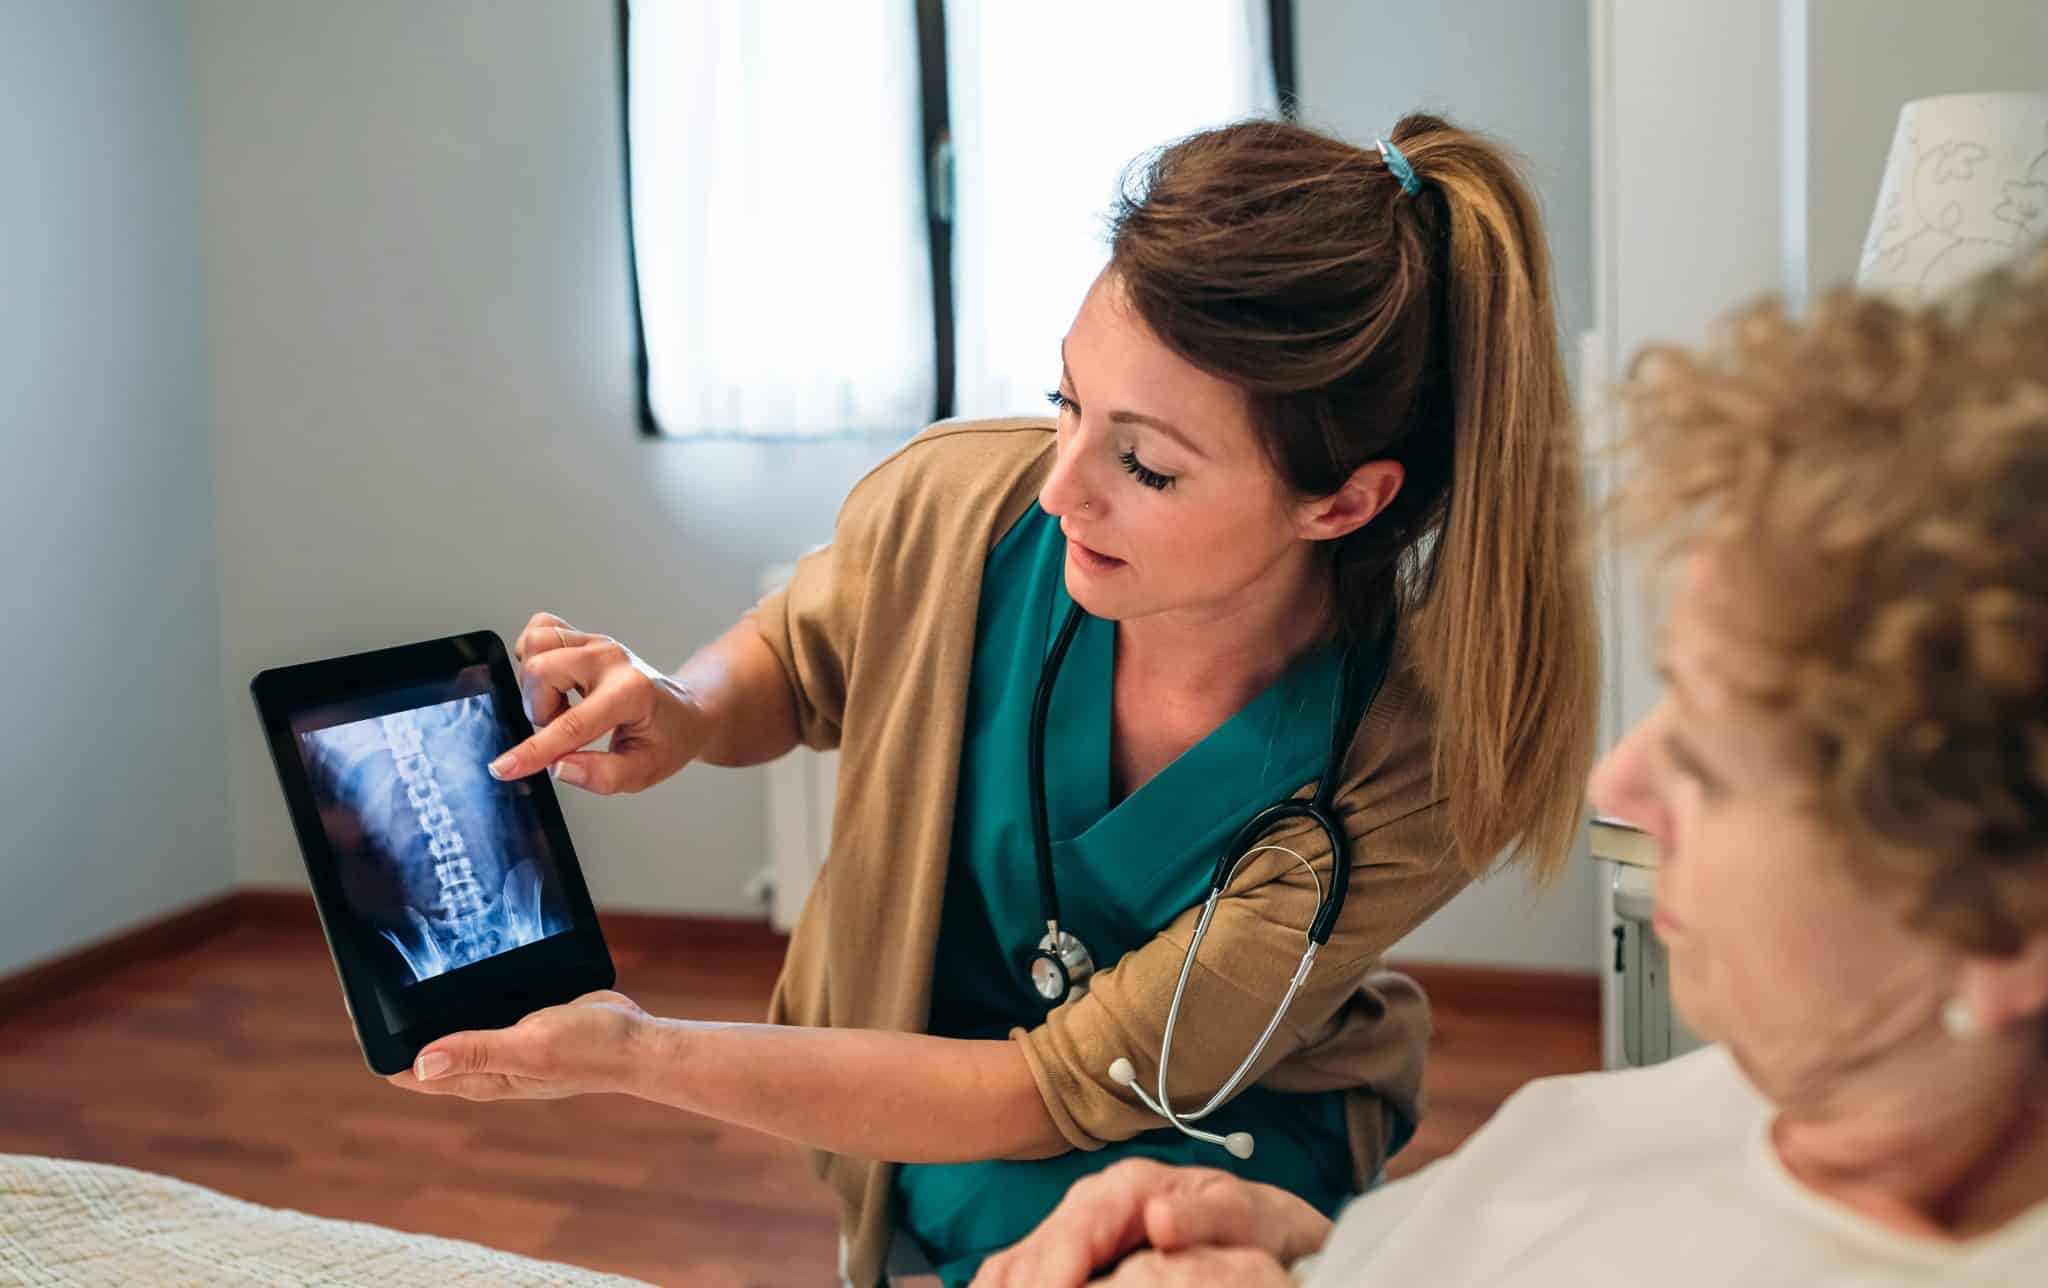 Female doctor showing an x-ray on the tablet